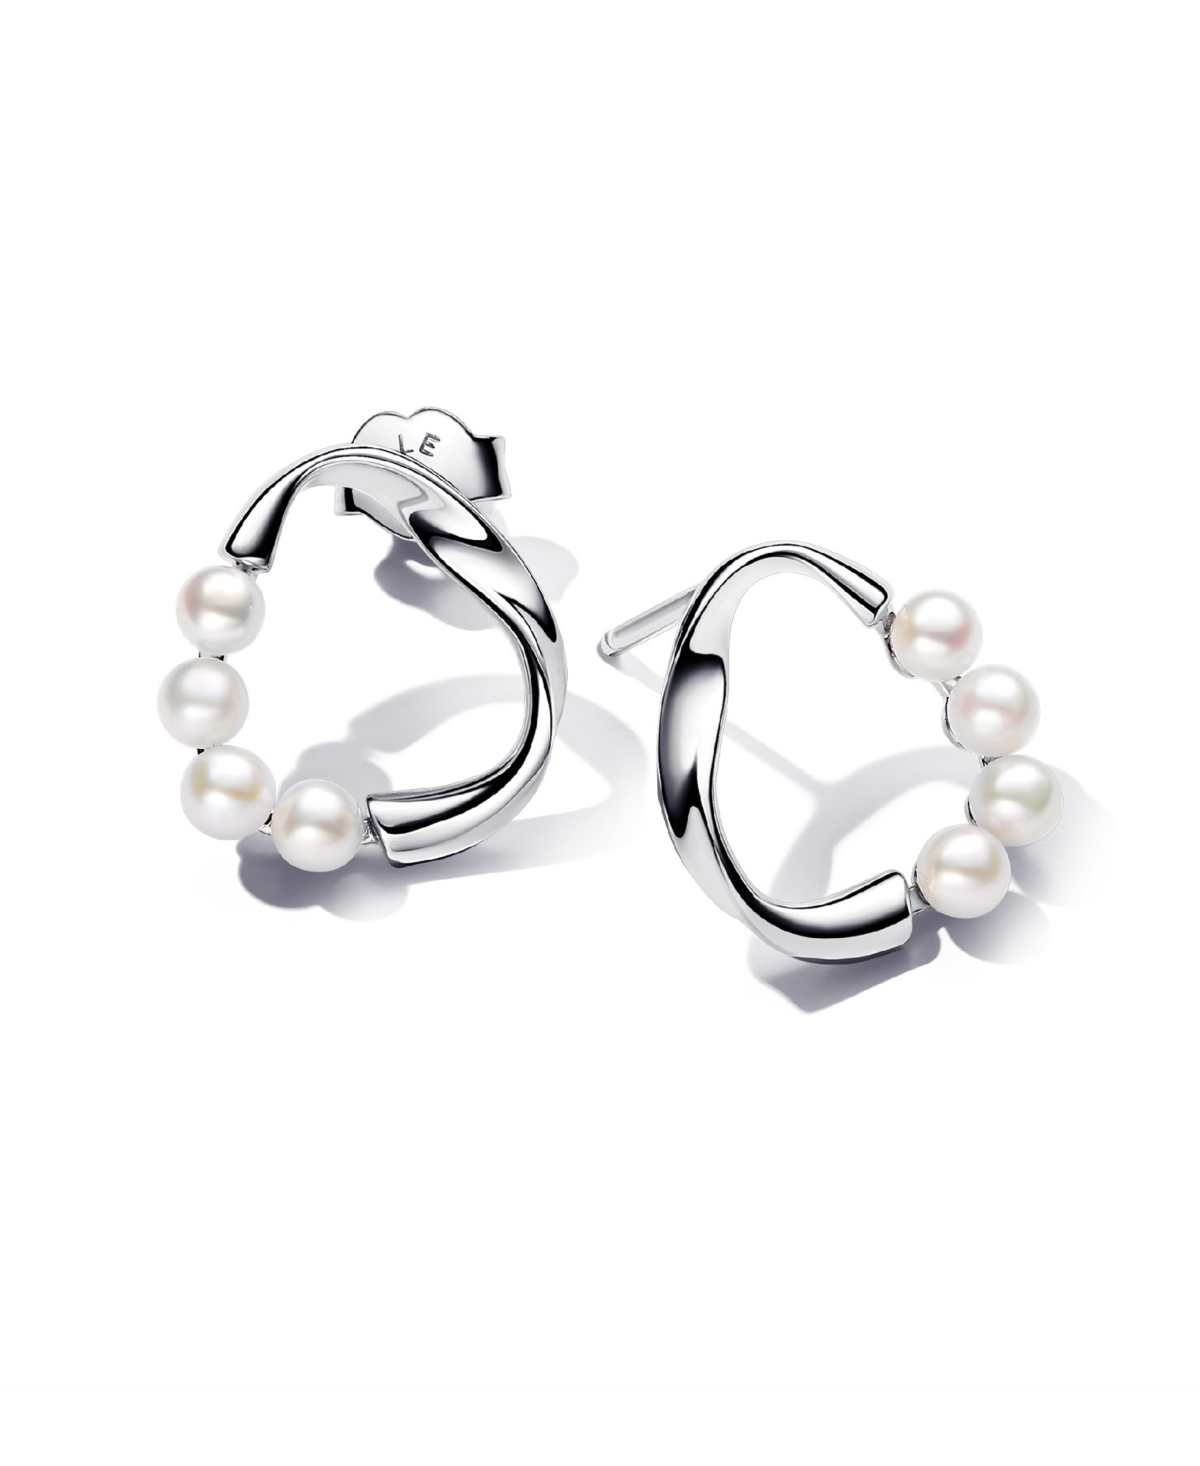 Silver Shaped Circle Treated Freshwater Cultured Pearls Stud Earrings - Silver